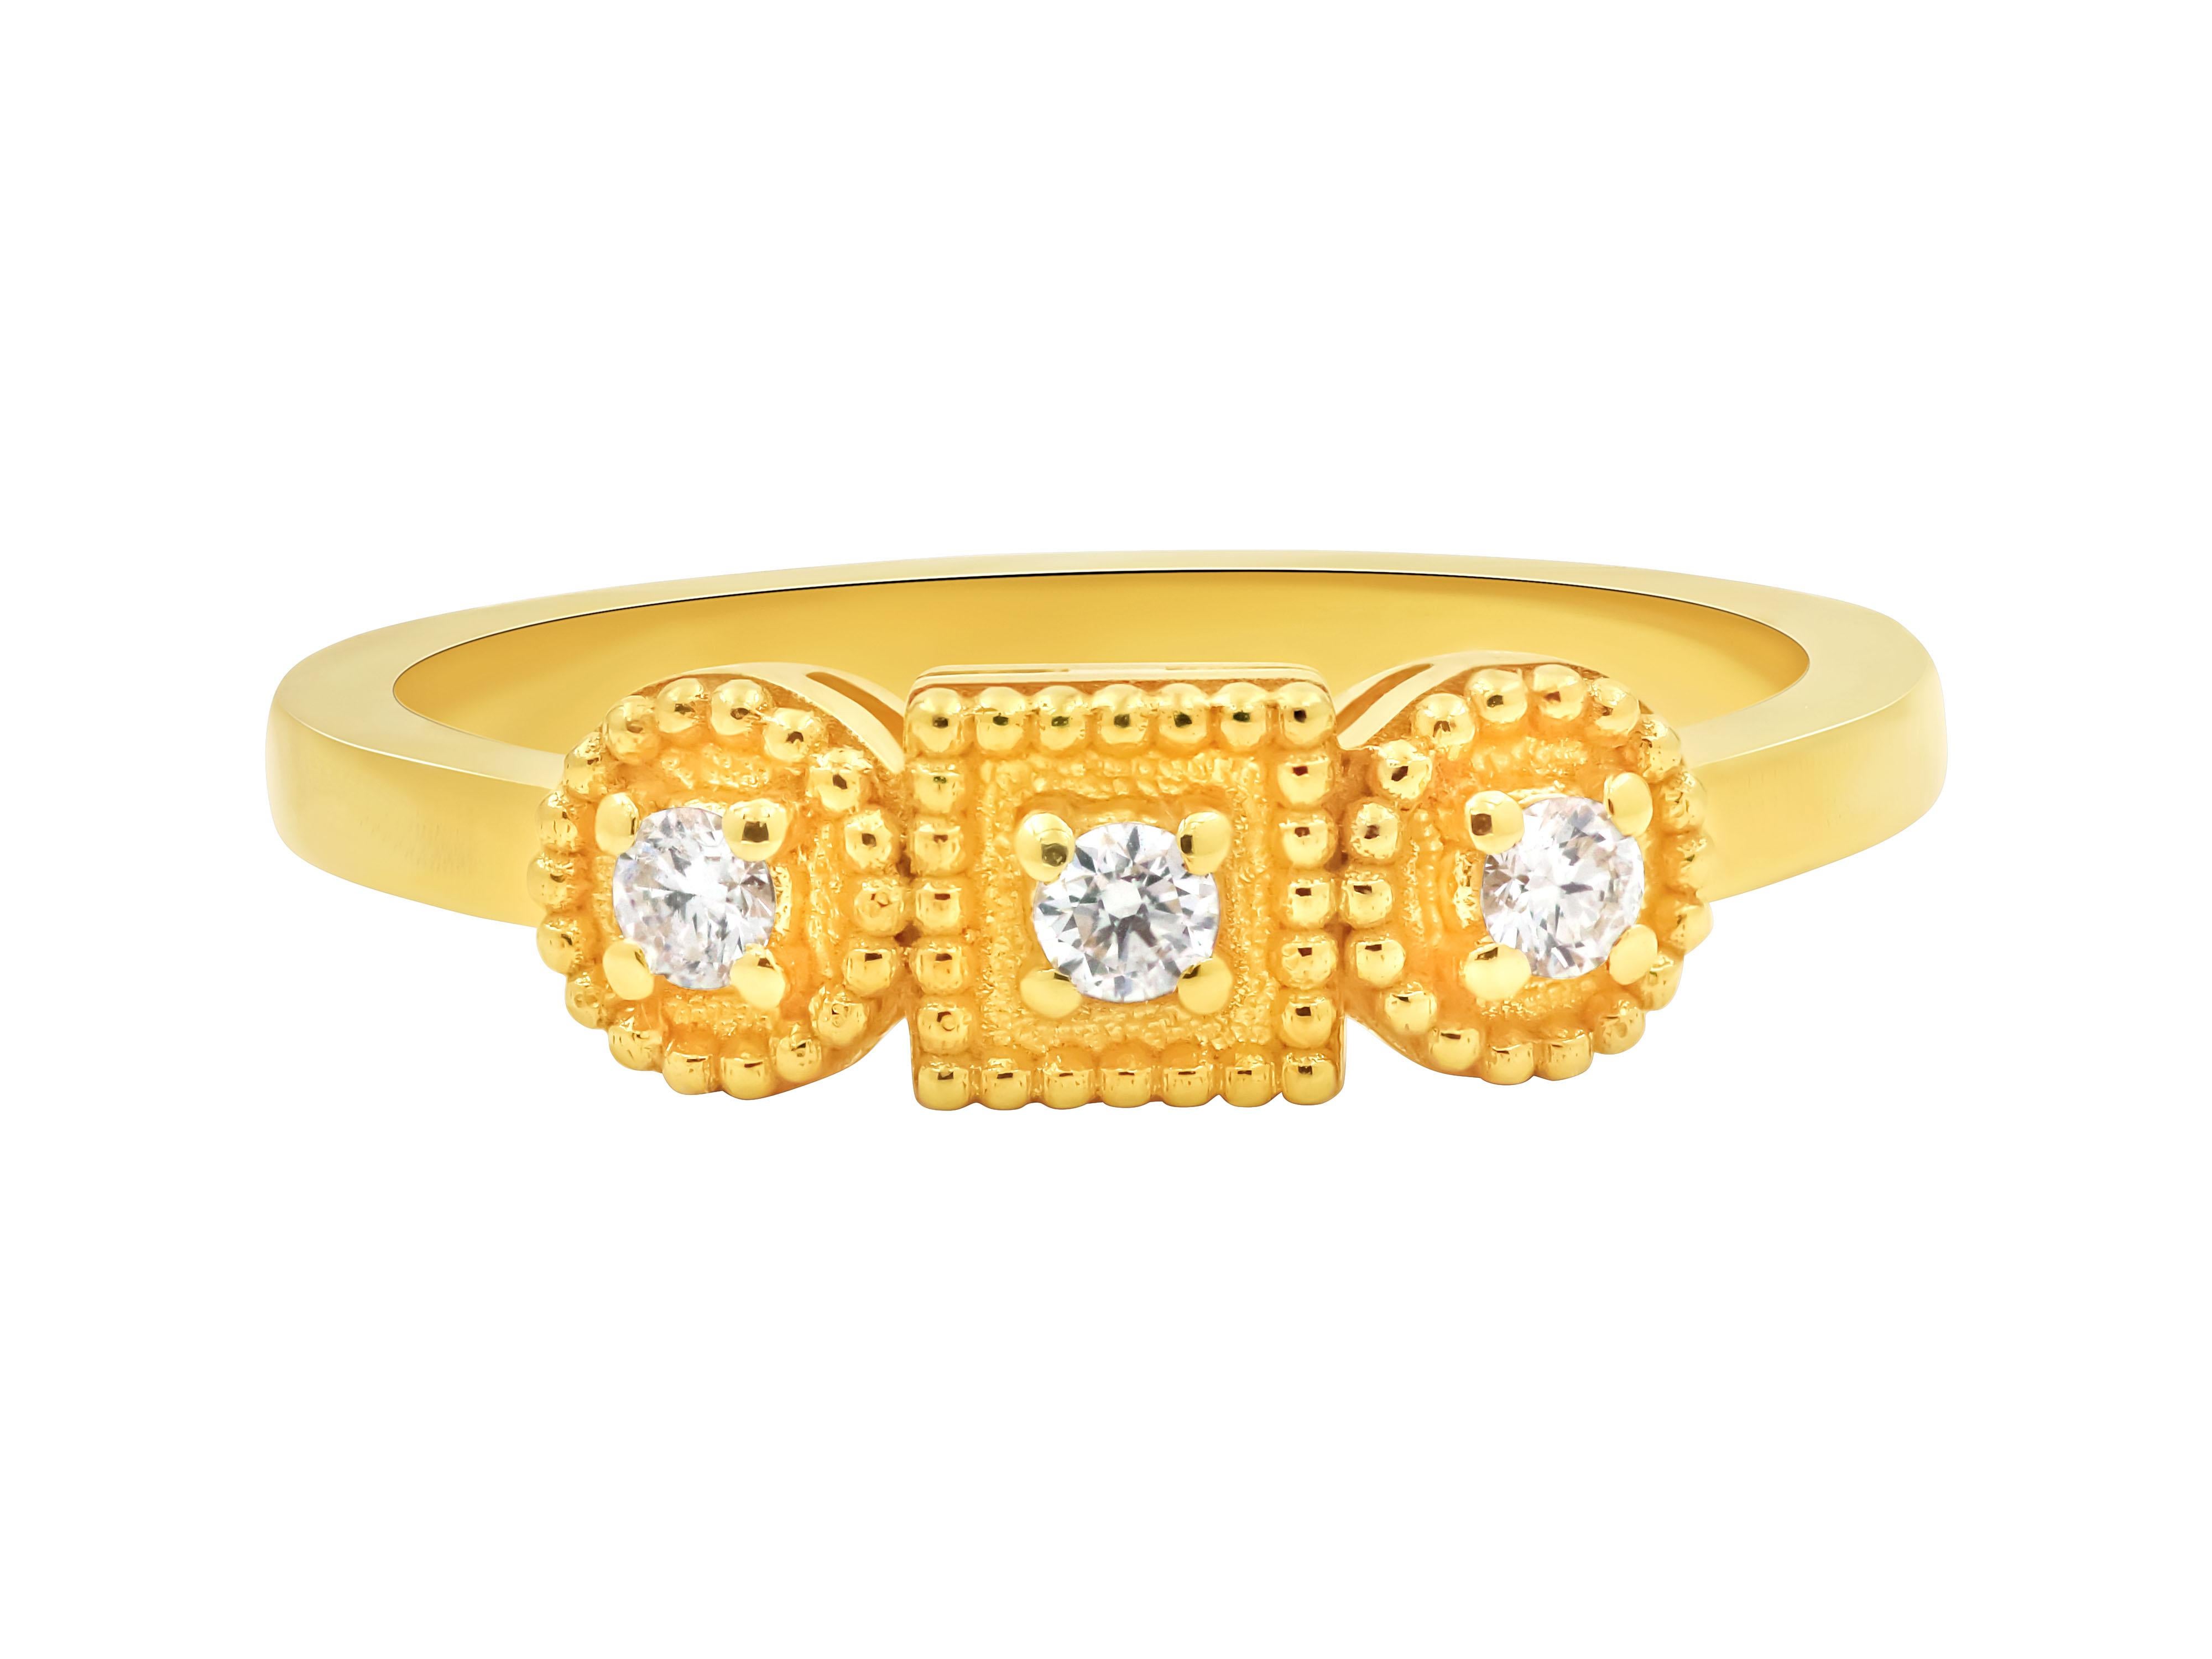 Greek granulated neoclassic ring in 18k gold with three brilliant cut diamonds total 0.12 carats that combines classical aesthetics with modern techniques. The neoclassic design of the ring takes inspiration from Ancient Greek art, characterized by